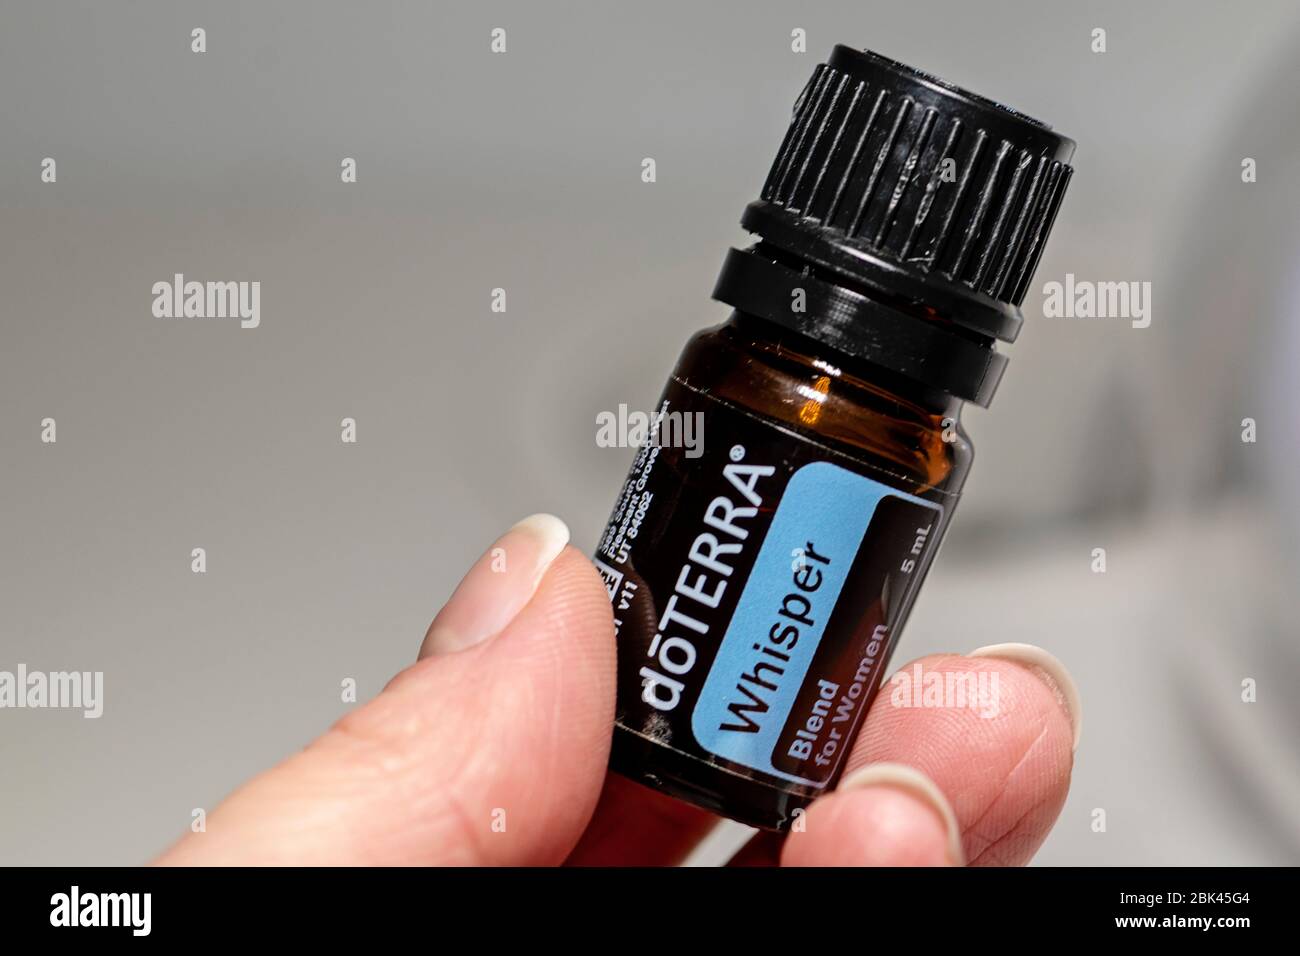 Banska Bystrica, Slovakia - December 29th 2019: High quality essential oil Whisper Doterra brand. Healthcare and wellbeing concept. Selective focus. Stock Photo